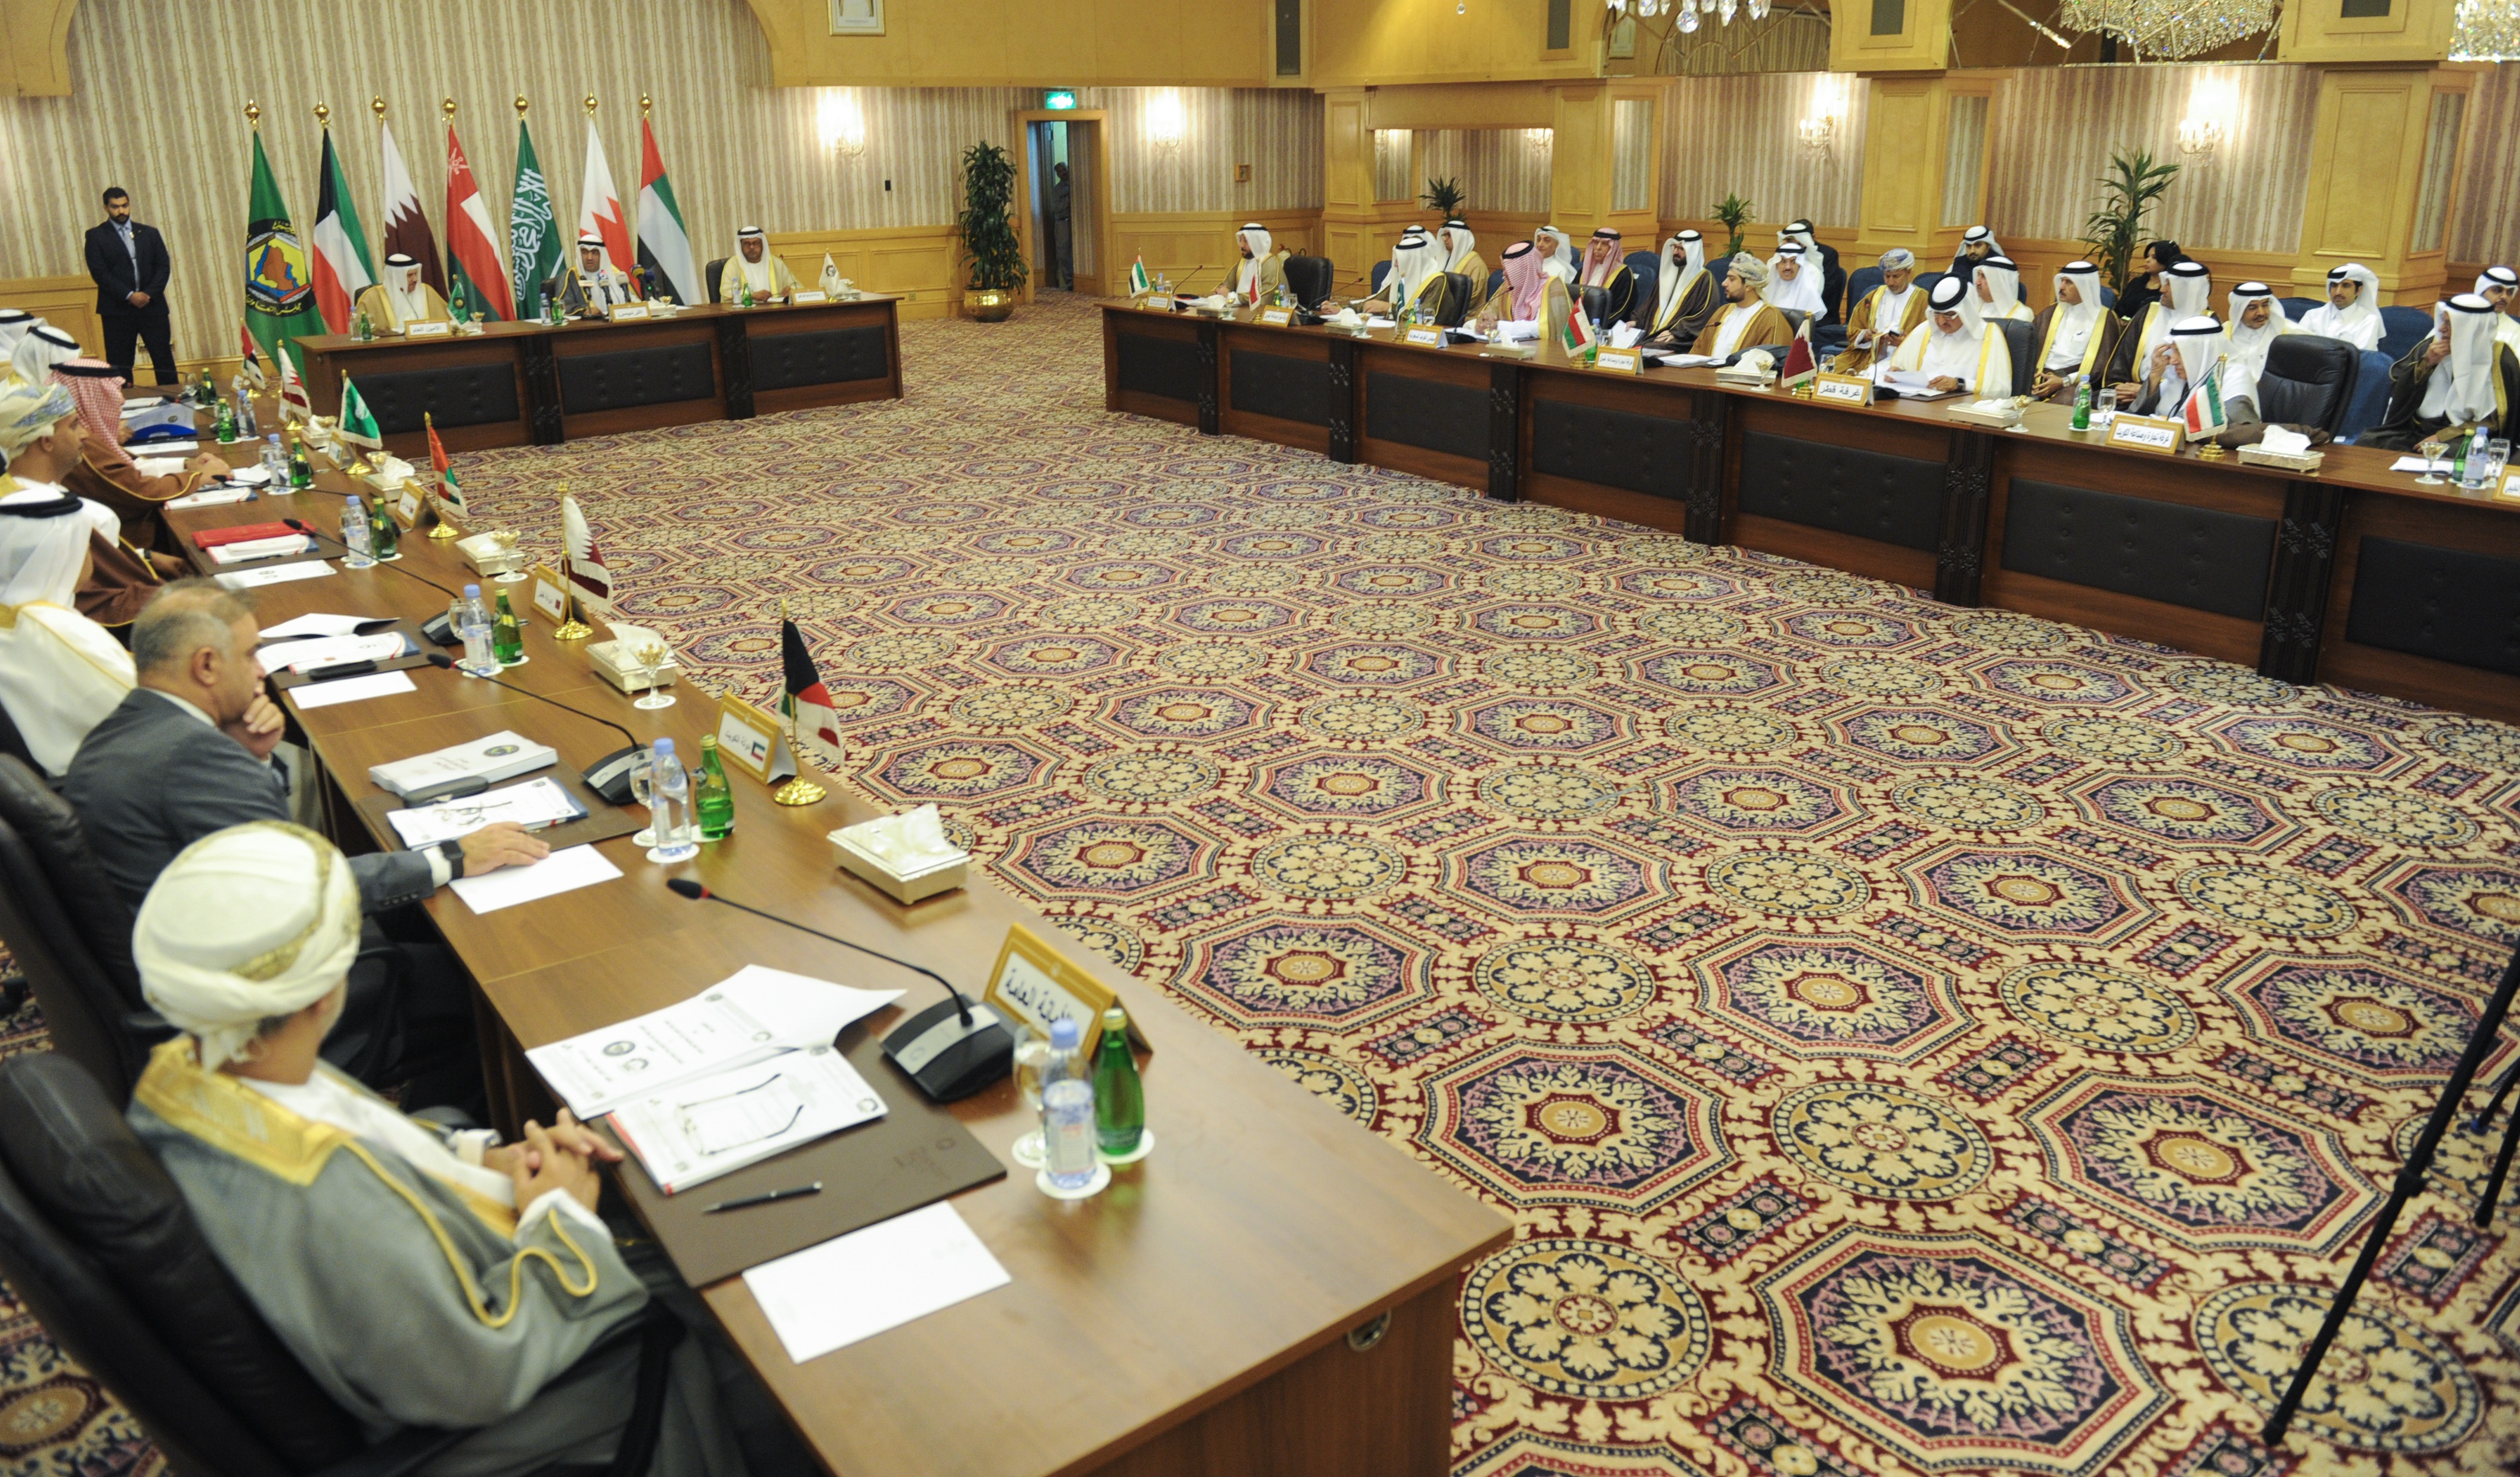 the 4th consultative meeting of ministers of trade and industry and heads of trade unions and chambers of the GCC